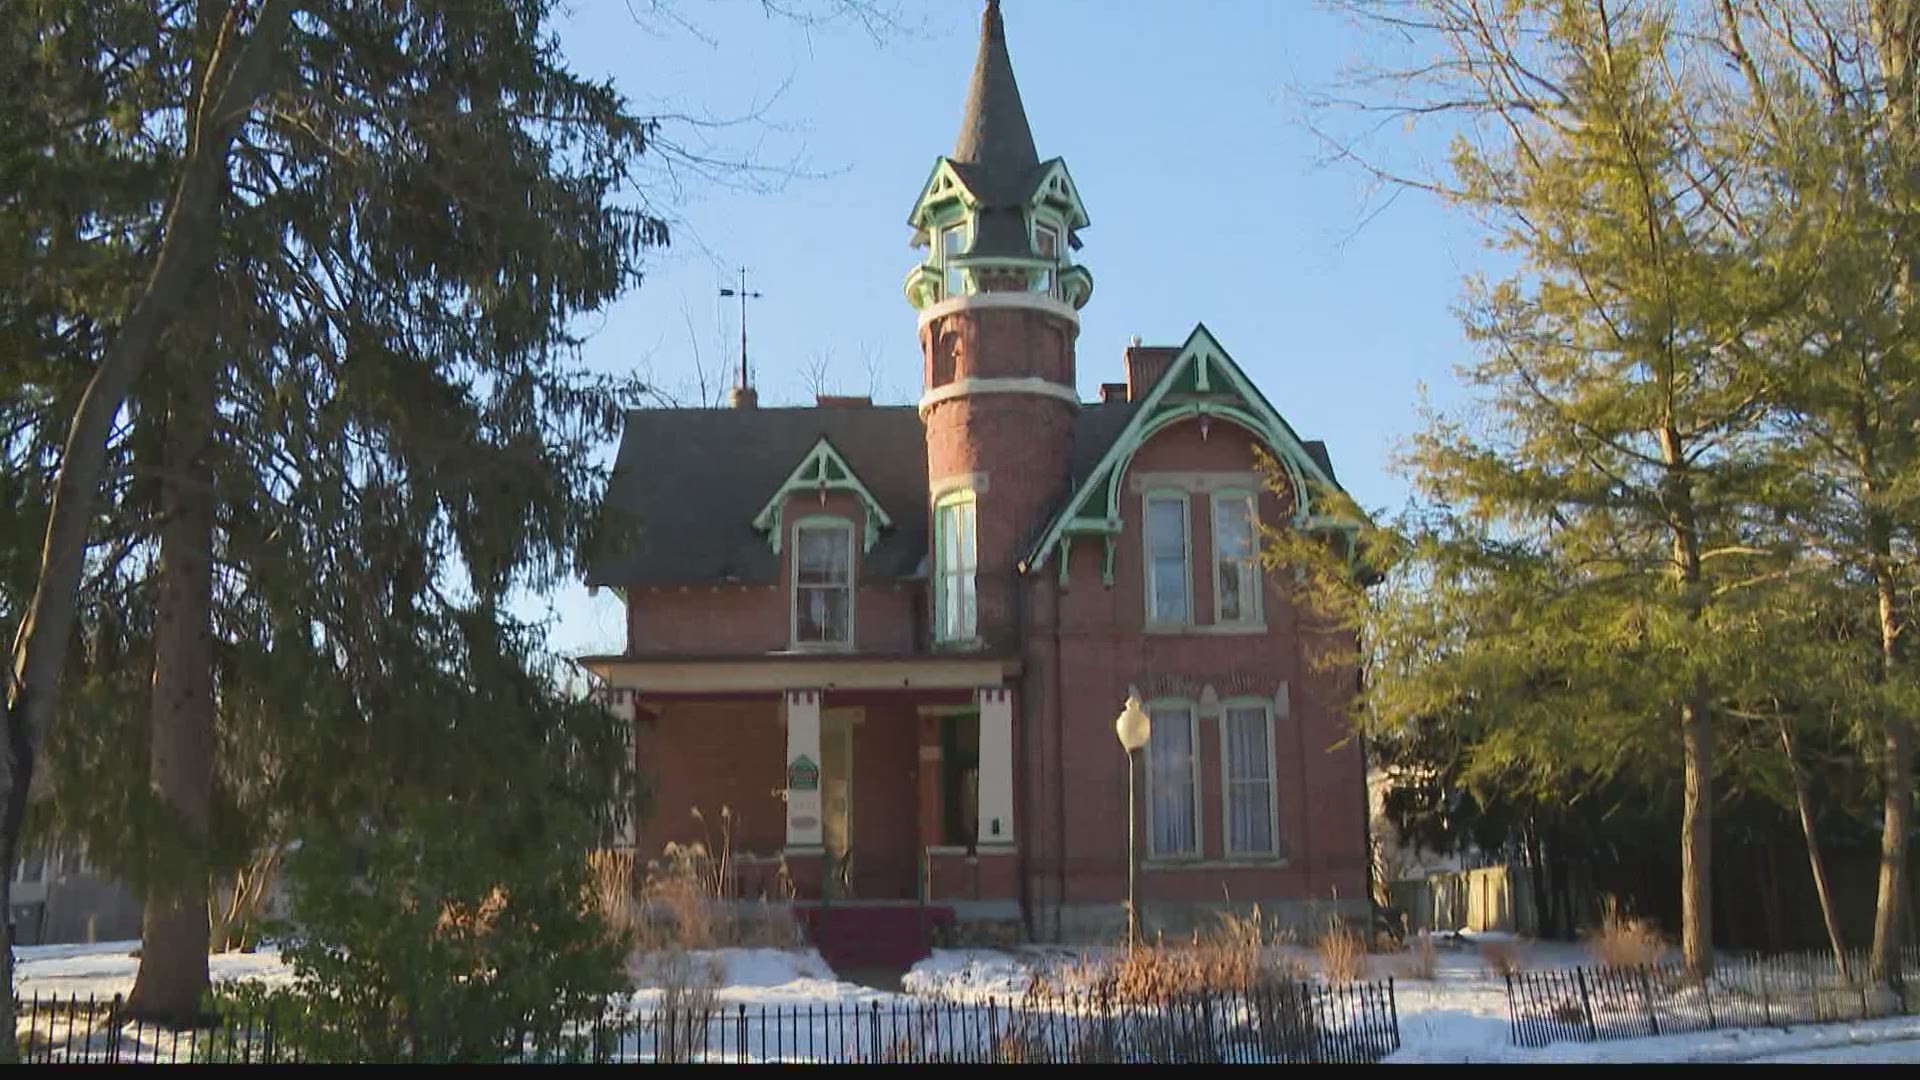 The Victorian Gothic-style home on East University Avenue was reportedly built sometime between 1873 and 1876.